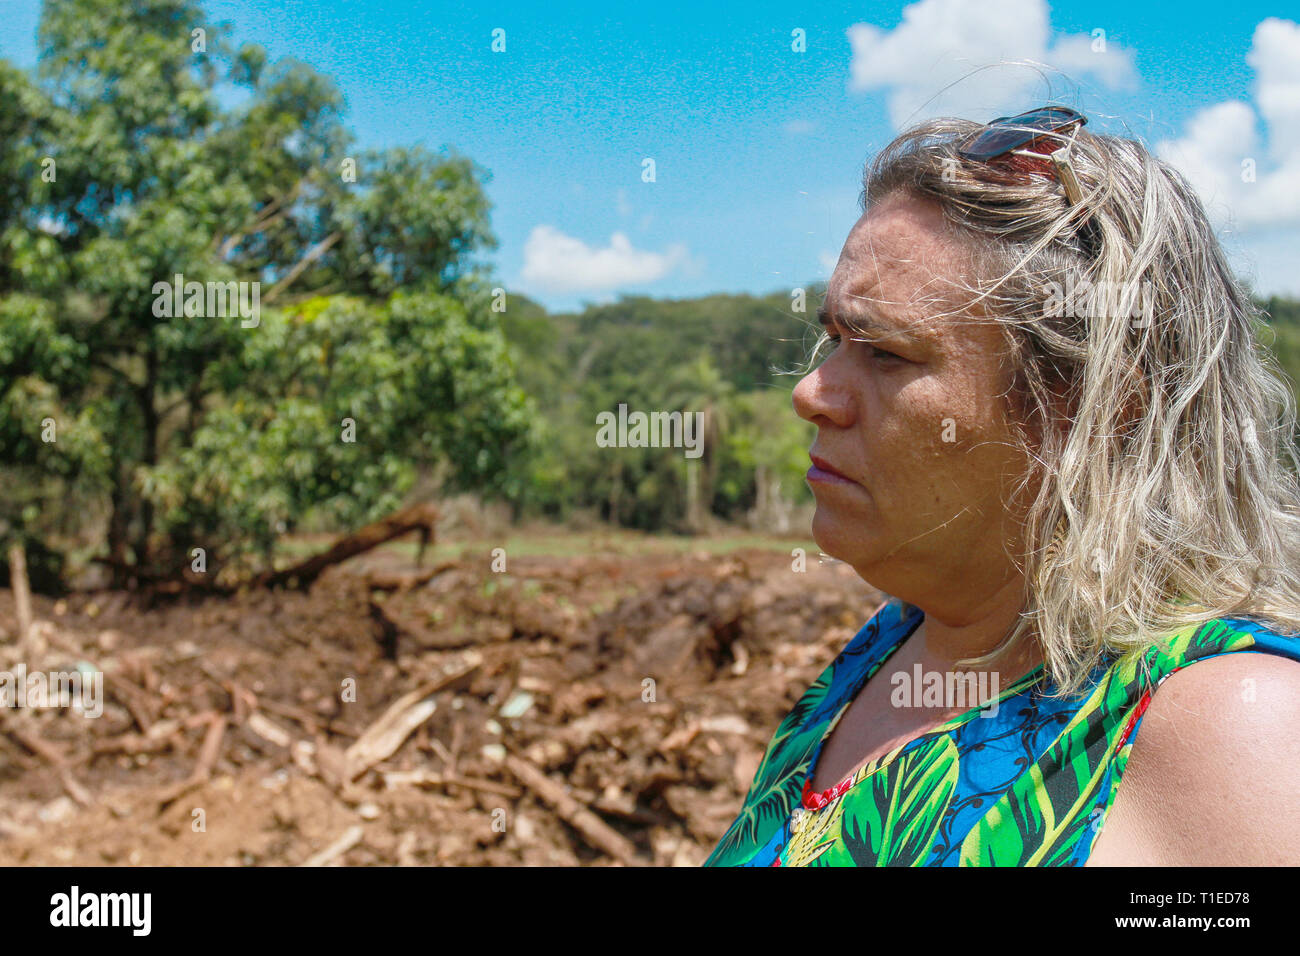 Brumadinho, Brazil. 18th Mar, 2019. Sueli de Oliveira Costa, sales manager, stands on the devastated earth. Her husband, Paulo Giovani dos Santos, died in the breach of the dam on 25.01.2019. The day changed the lives of thousands of people in the small Brazilian town of Brumadinho. Two months later, anger, grief and despair rule. (to dpa 'Everything is gone' - inhabitants of Brumadinho suffer from perineal tragedy') Credit: Rodney Costa/dpa/Alamy Live News Stock Photo